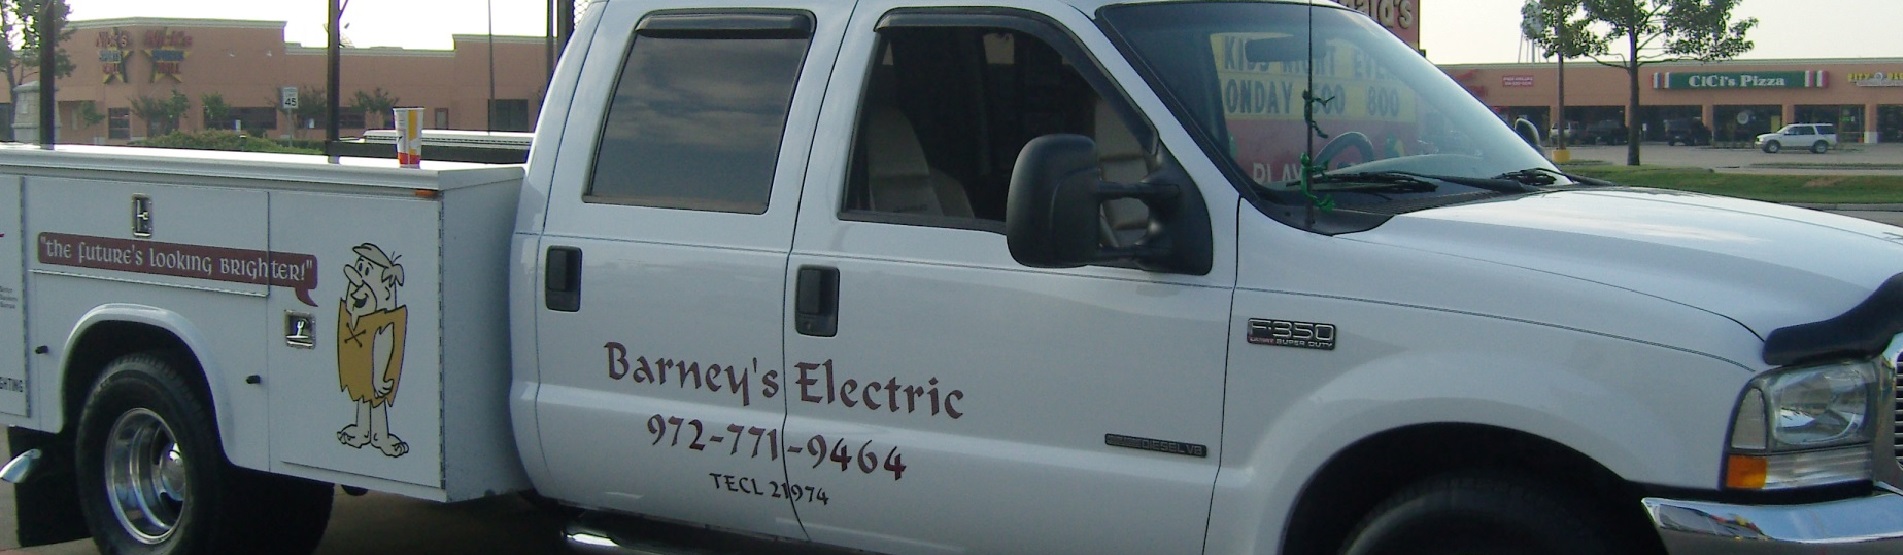 electrical contractor Heath texas Electrician Heath TX Barney's Electric Full Service Electrician Residential Commercial Retail and New Construction Wiring Repair Installation Service 24 Hour Emergency Services Master Electrician Rockwall Texas